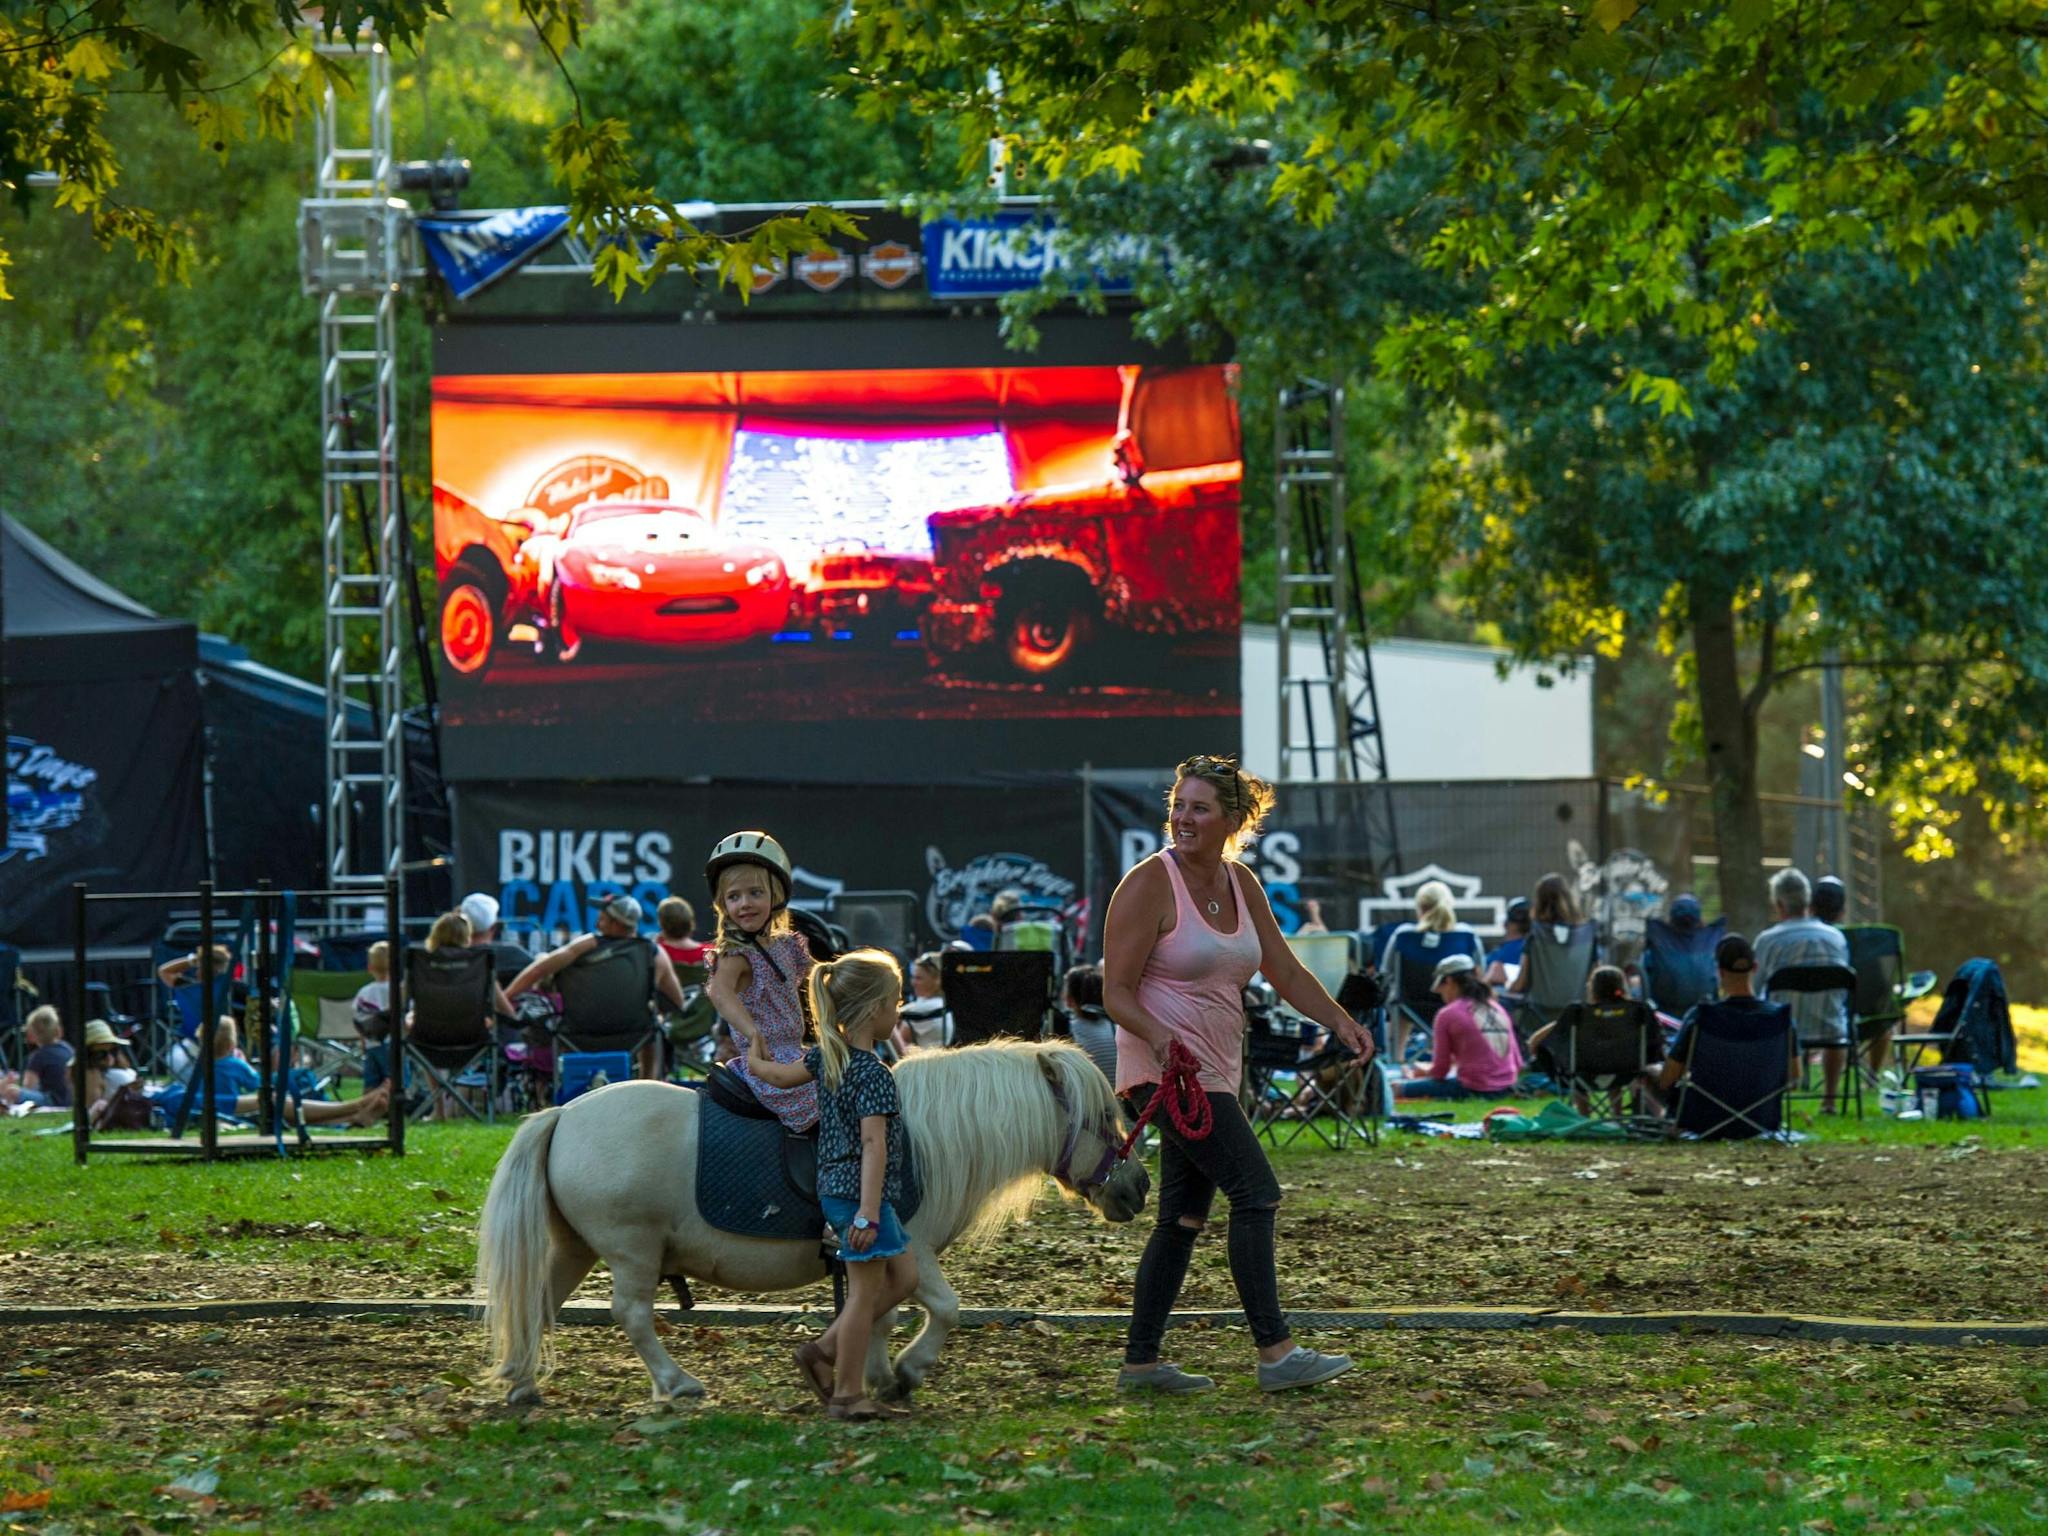 Pony rides with the big screen in the background showing a kids movie